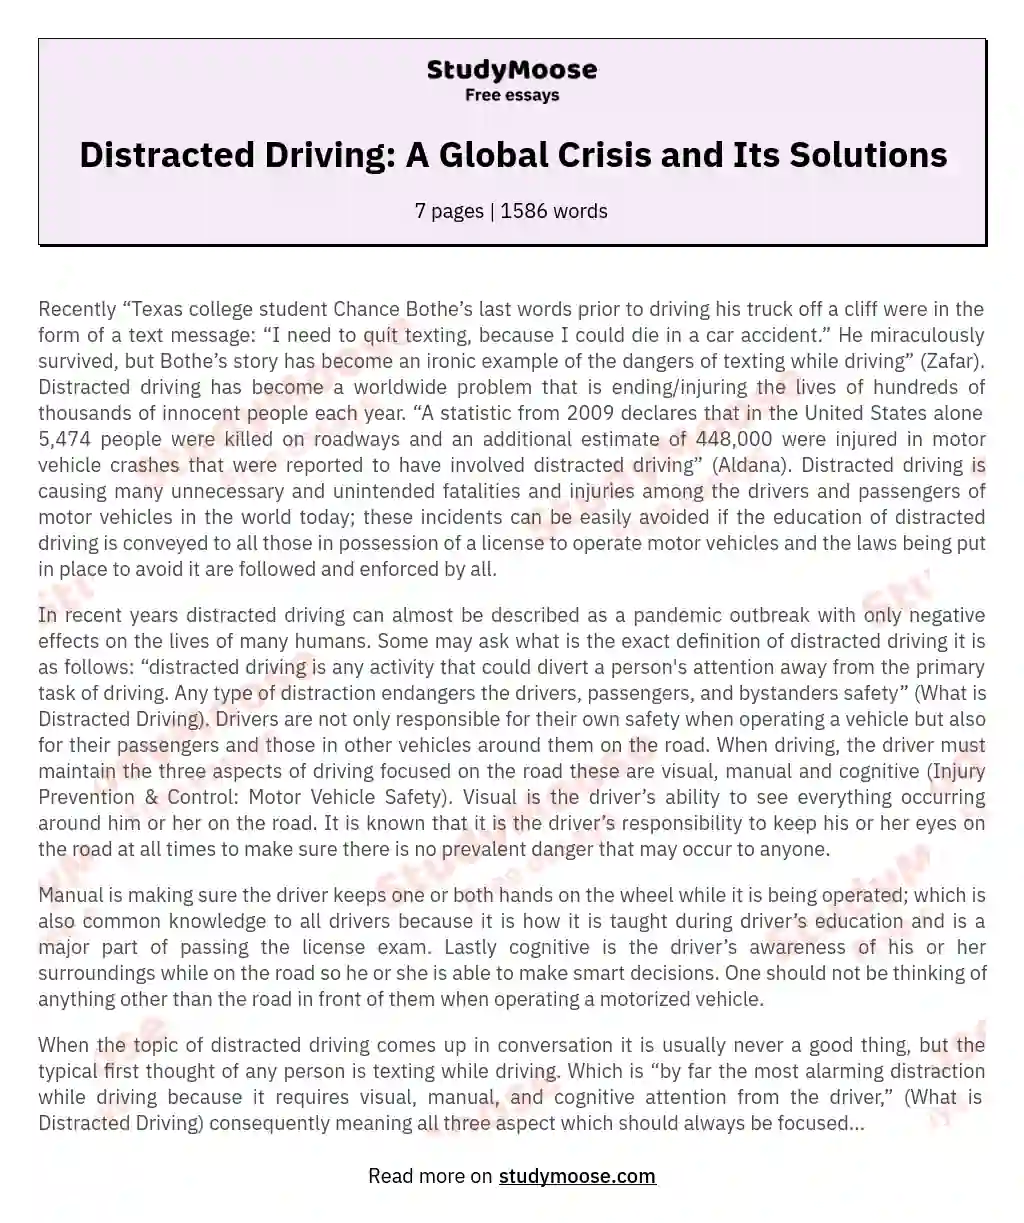 argumentative essay on distracted driving